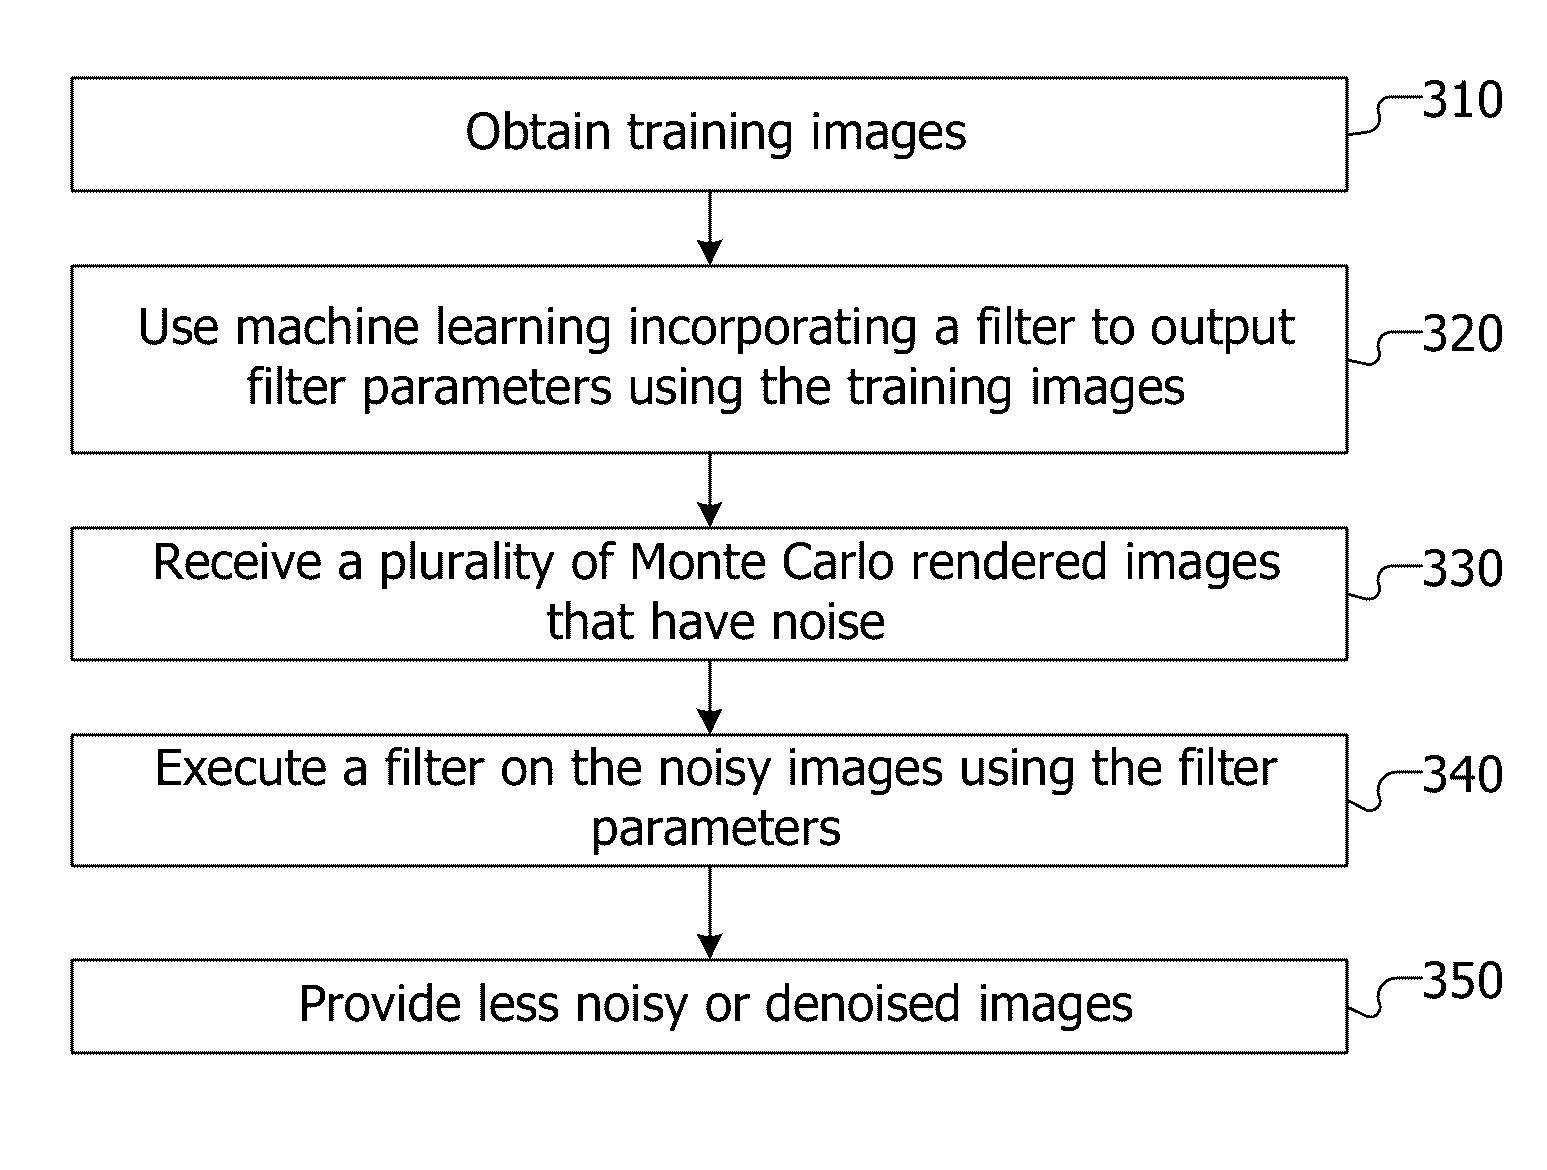 Using machine learning to filter monte carlo noise from images